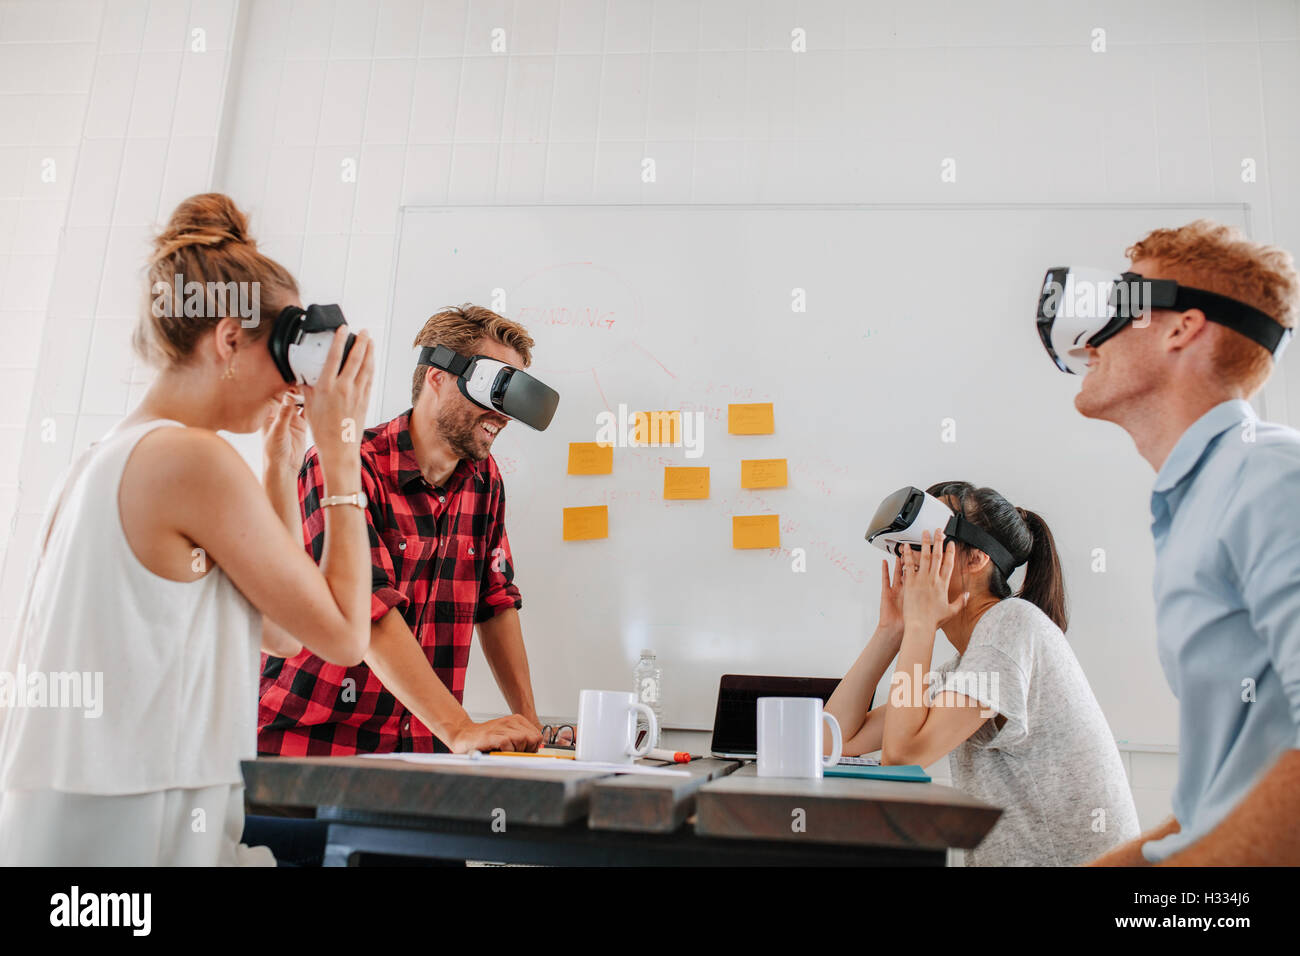 Business team using virtual reality headset in office meeting. Developers meeting with virtual reality simulator around table in Stock Photo